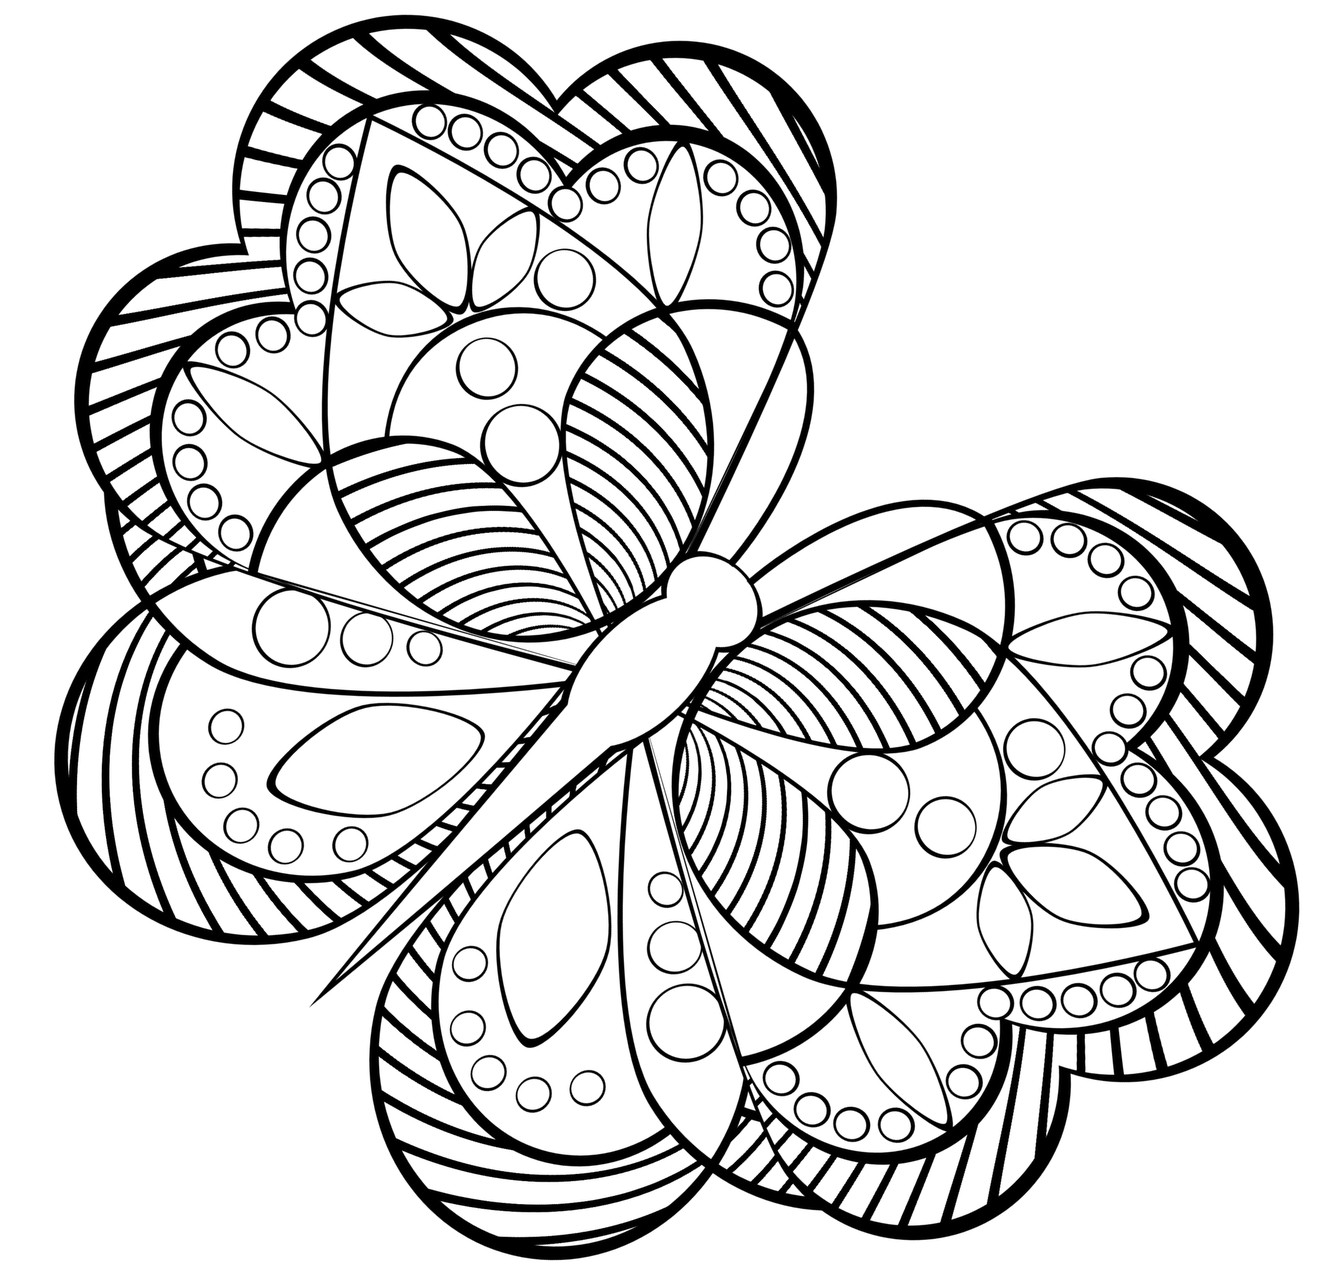 Online Coloring Pages For Adults
 Free Coloring Pages For Adults To Print Special Image 12